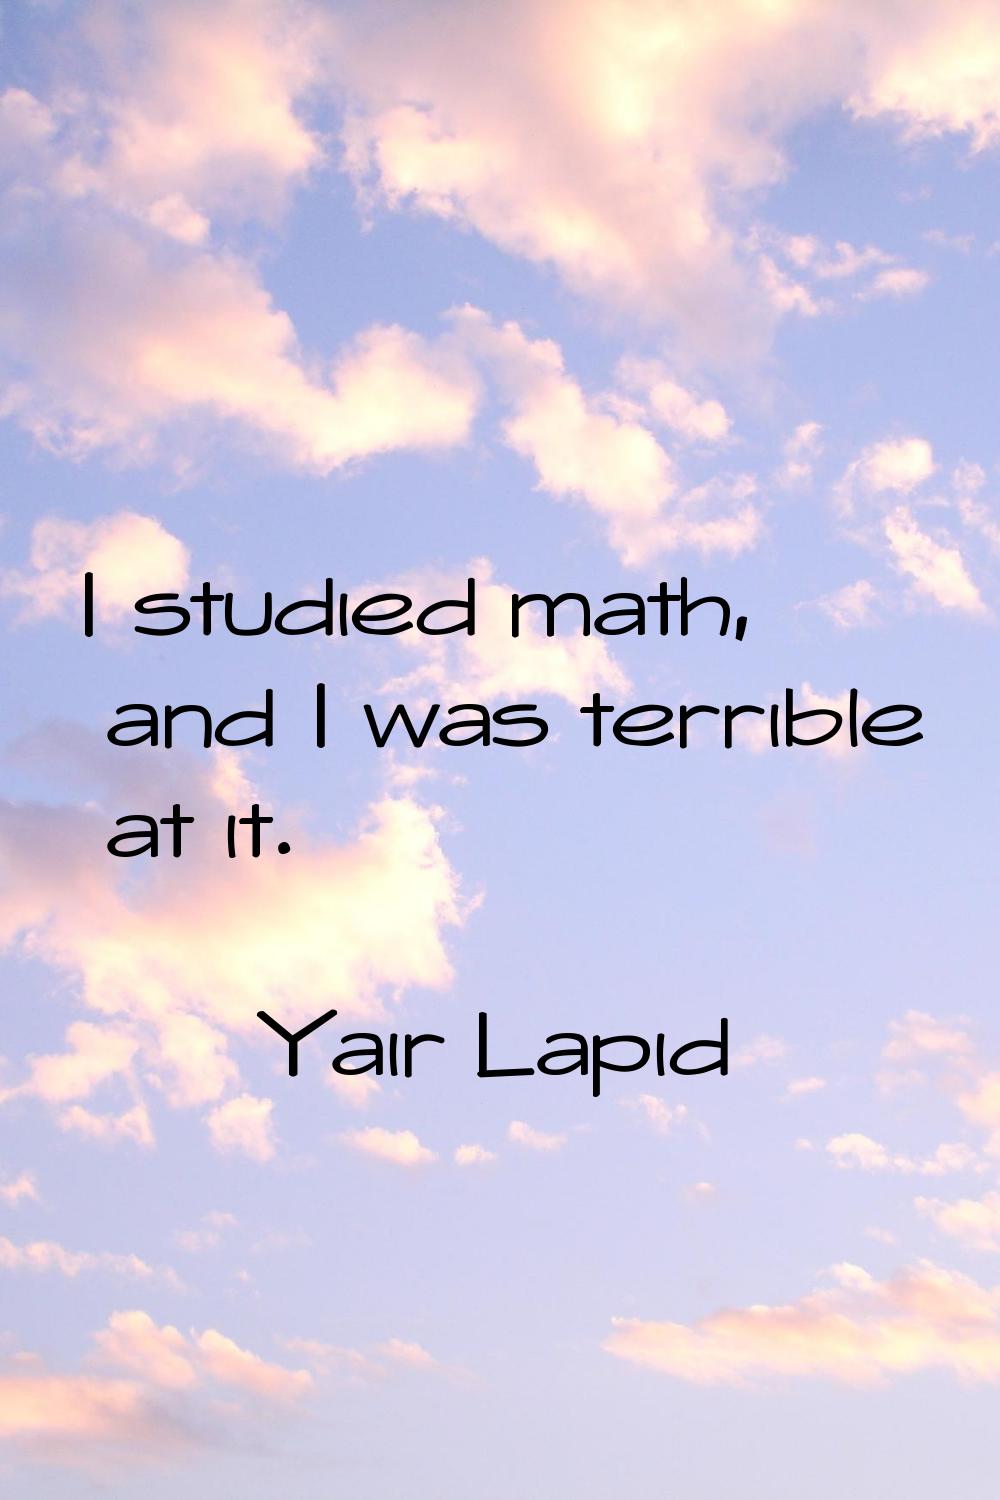 I studied math, and I was terrible at it.